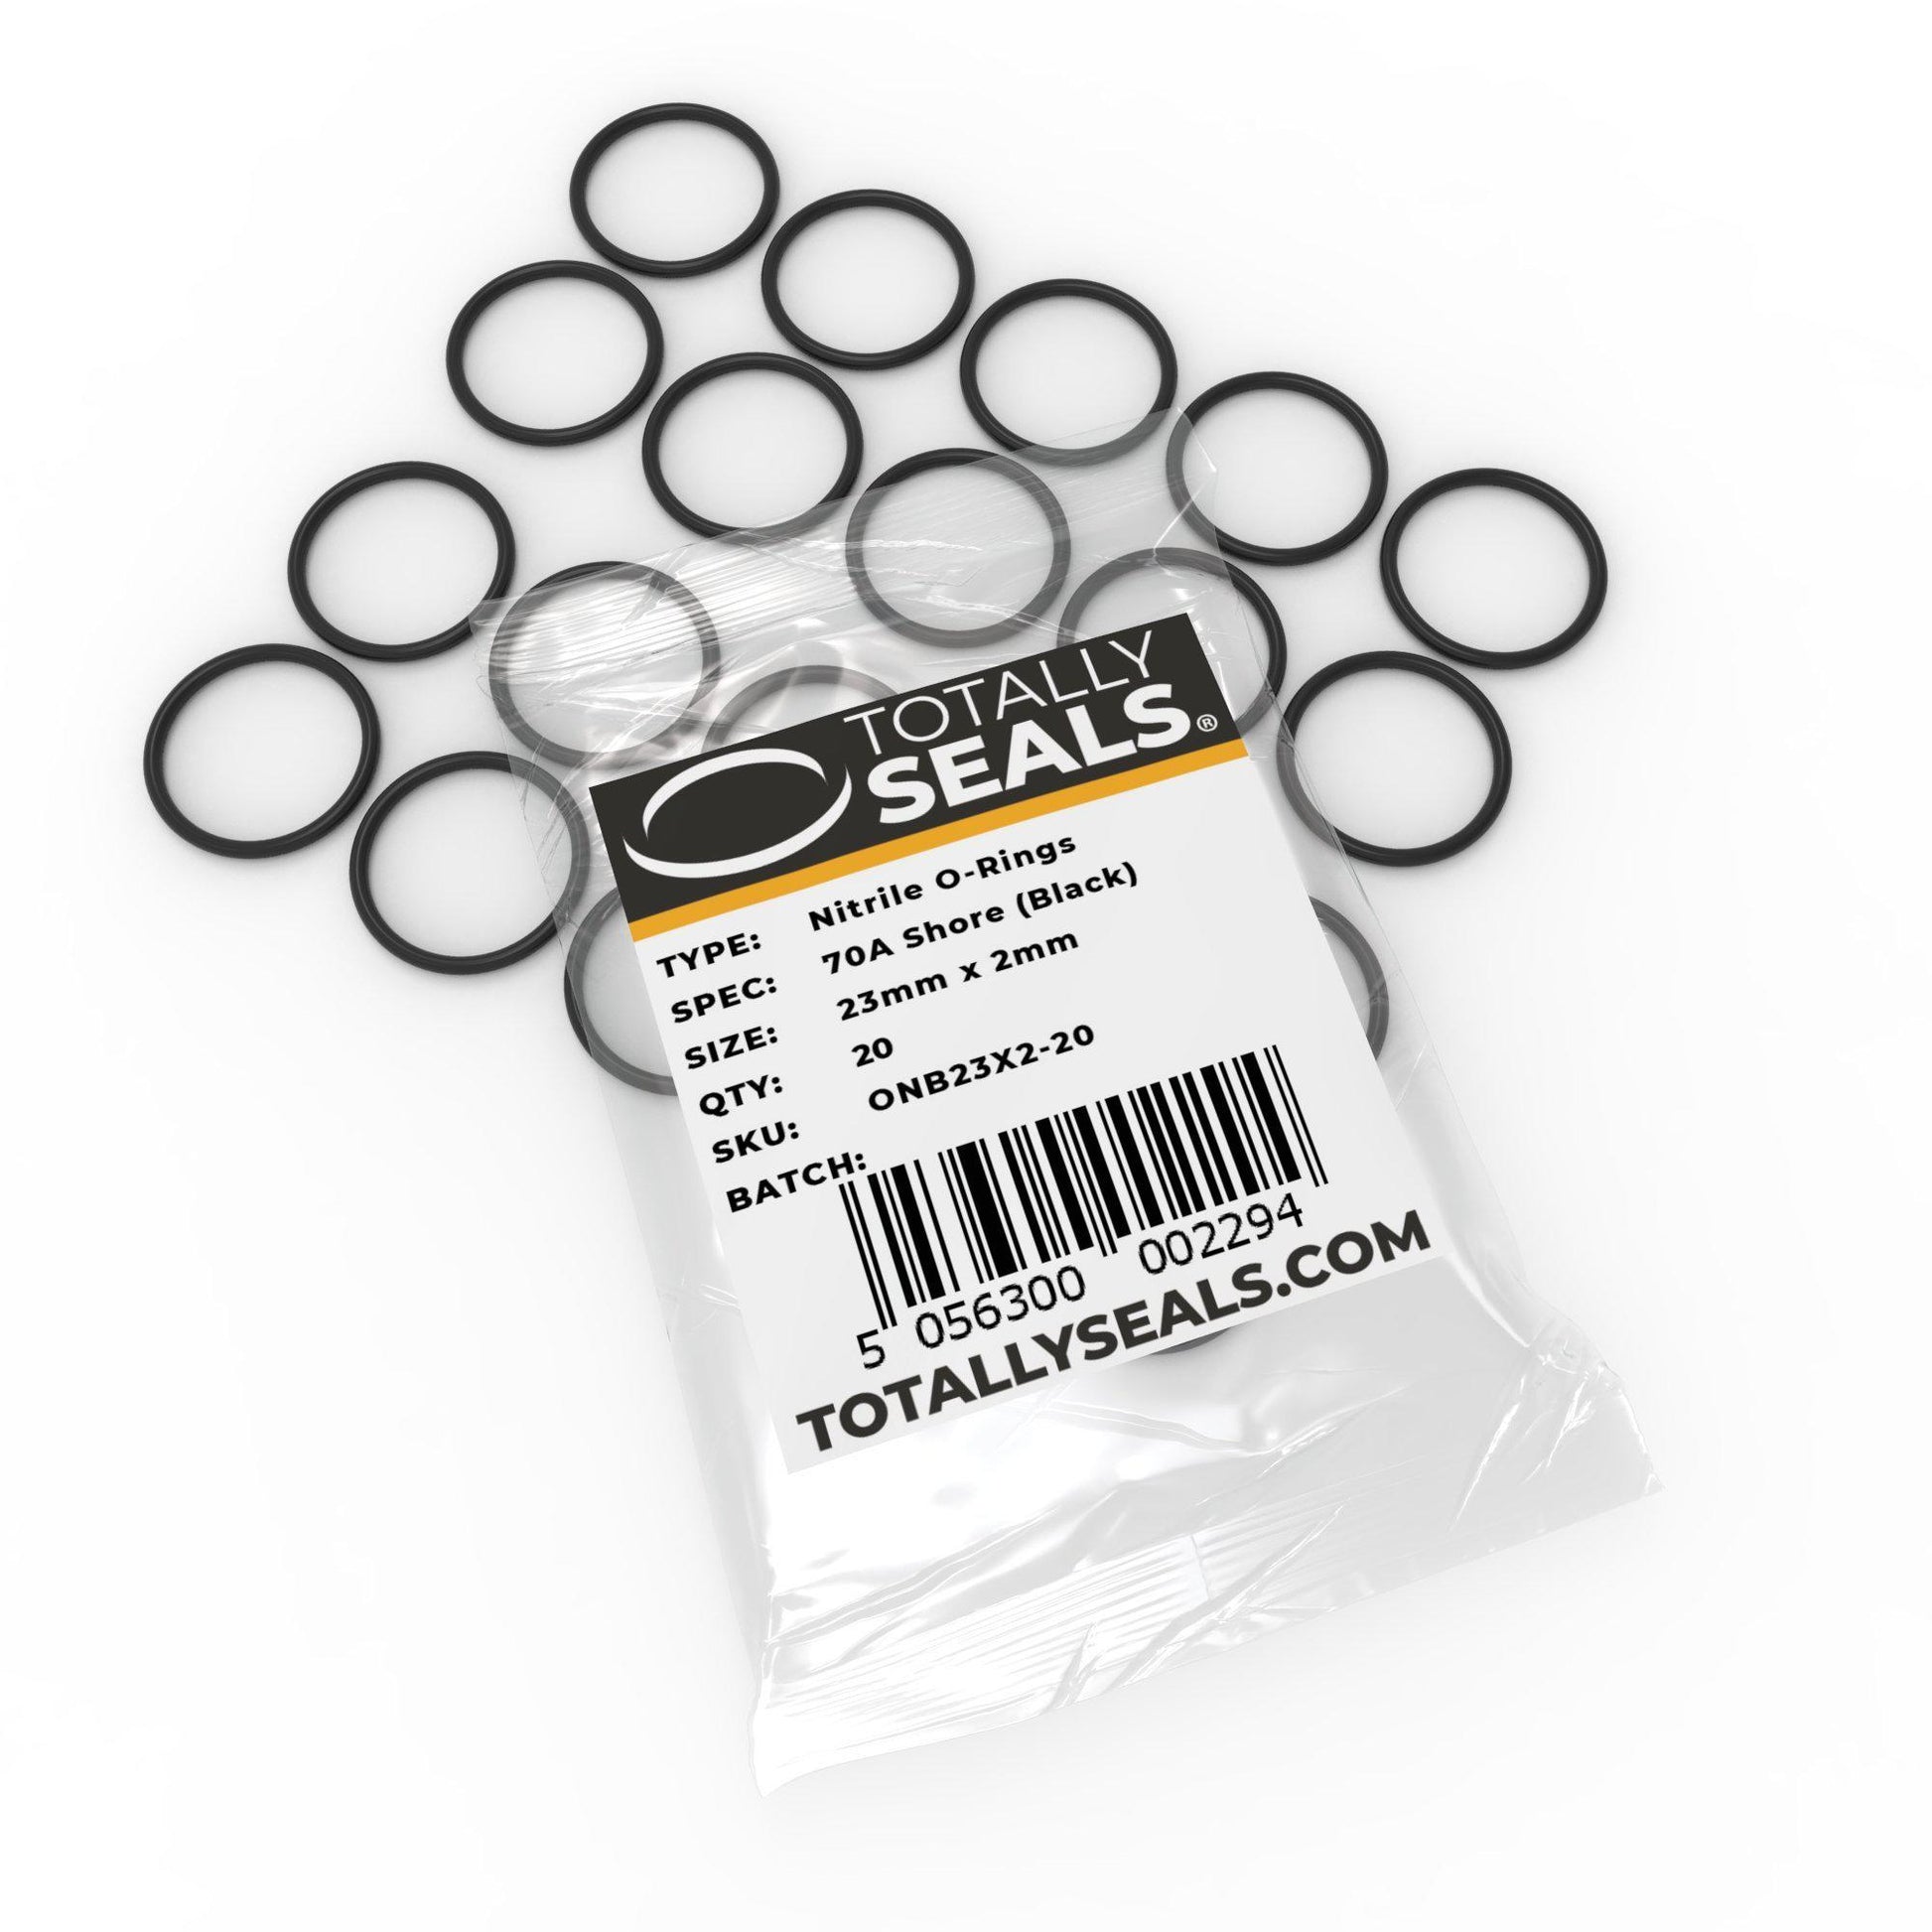 23mm x 2mm (27mm OD) Nitrile O-Rings - Totally Seals®